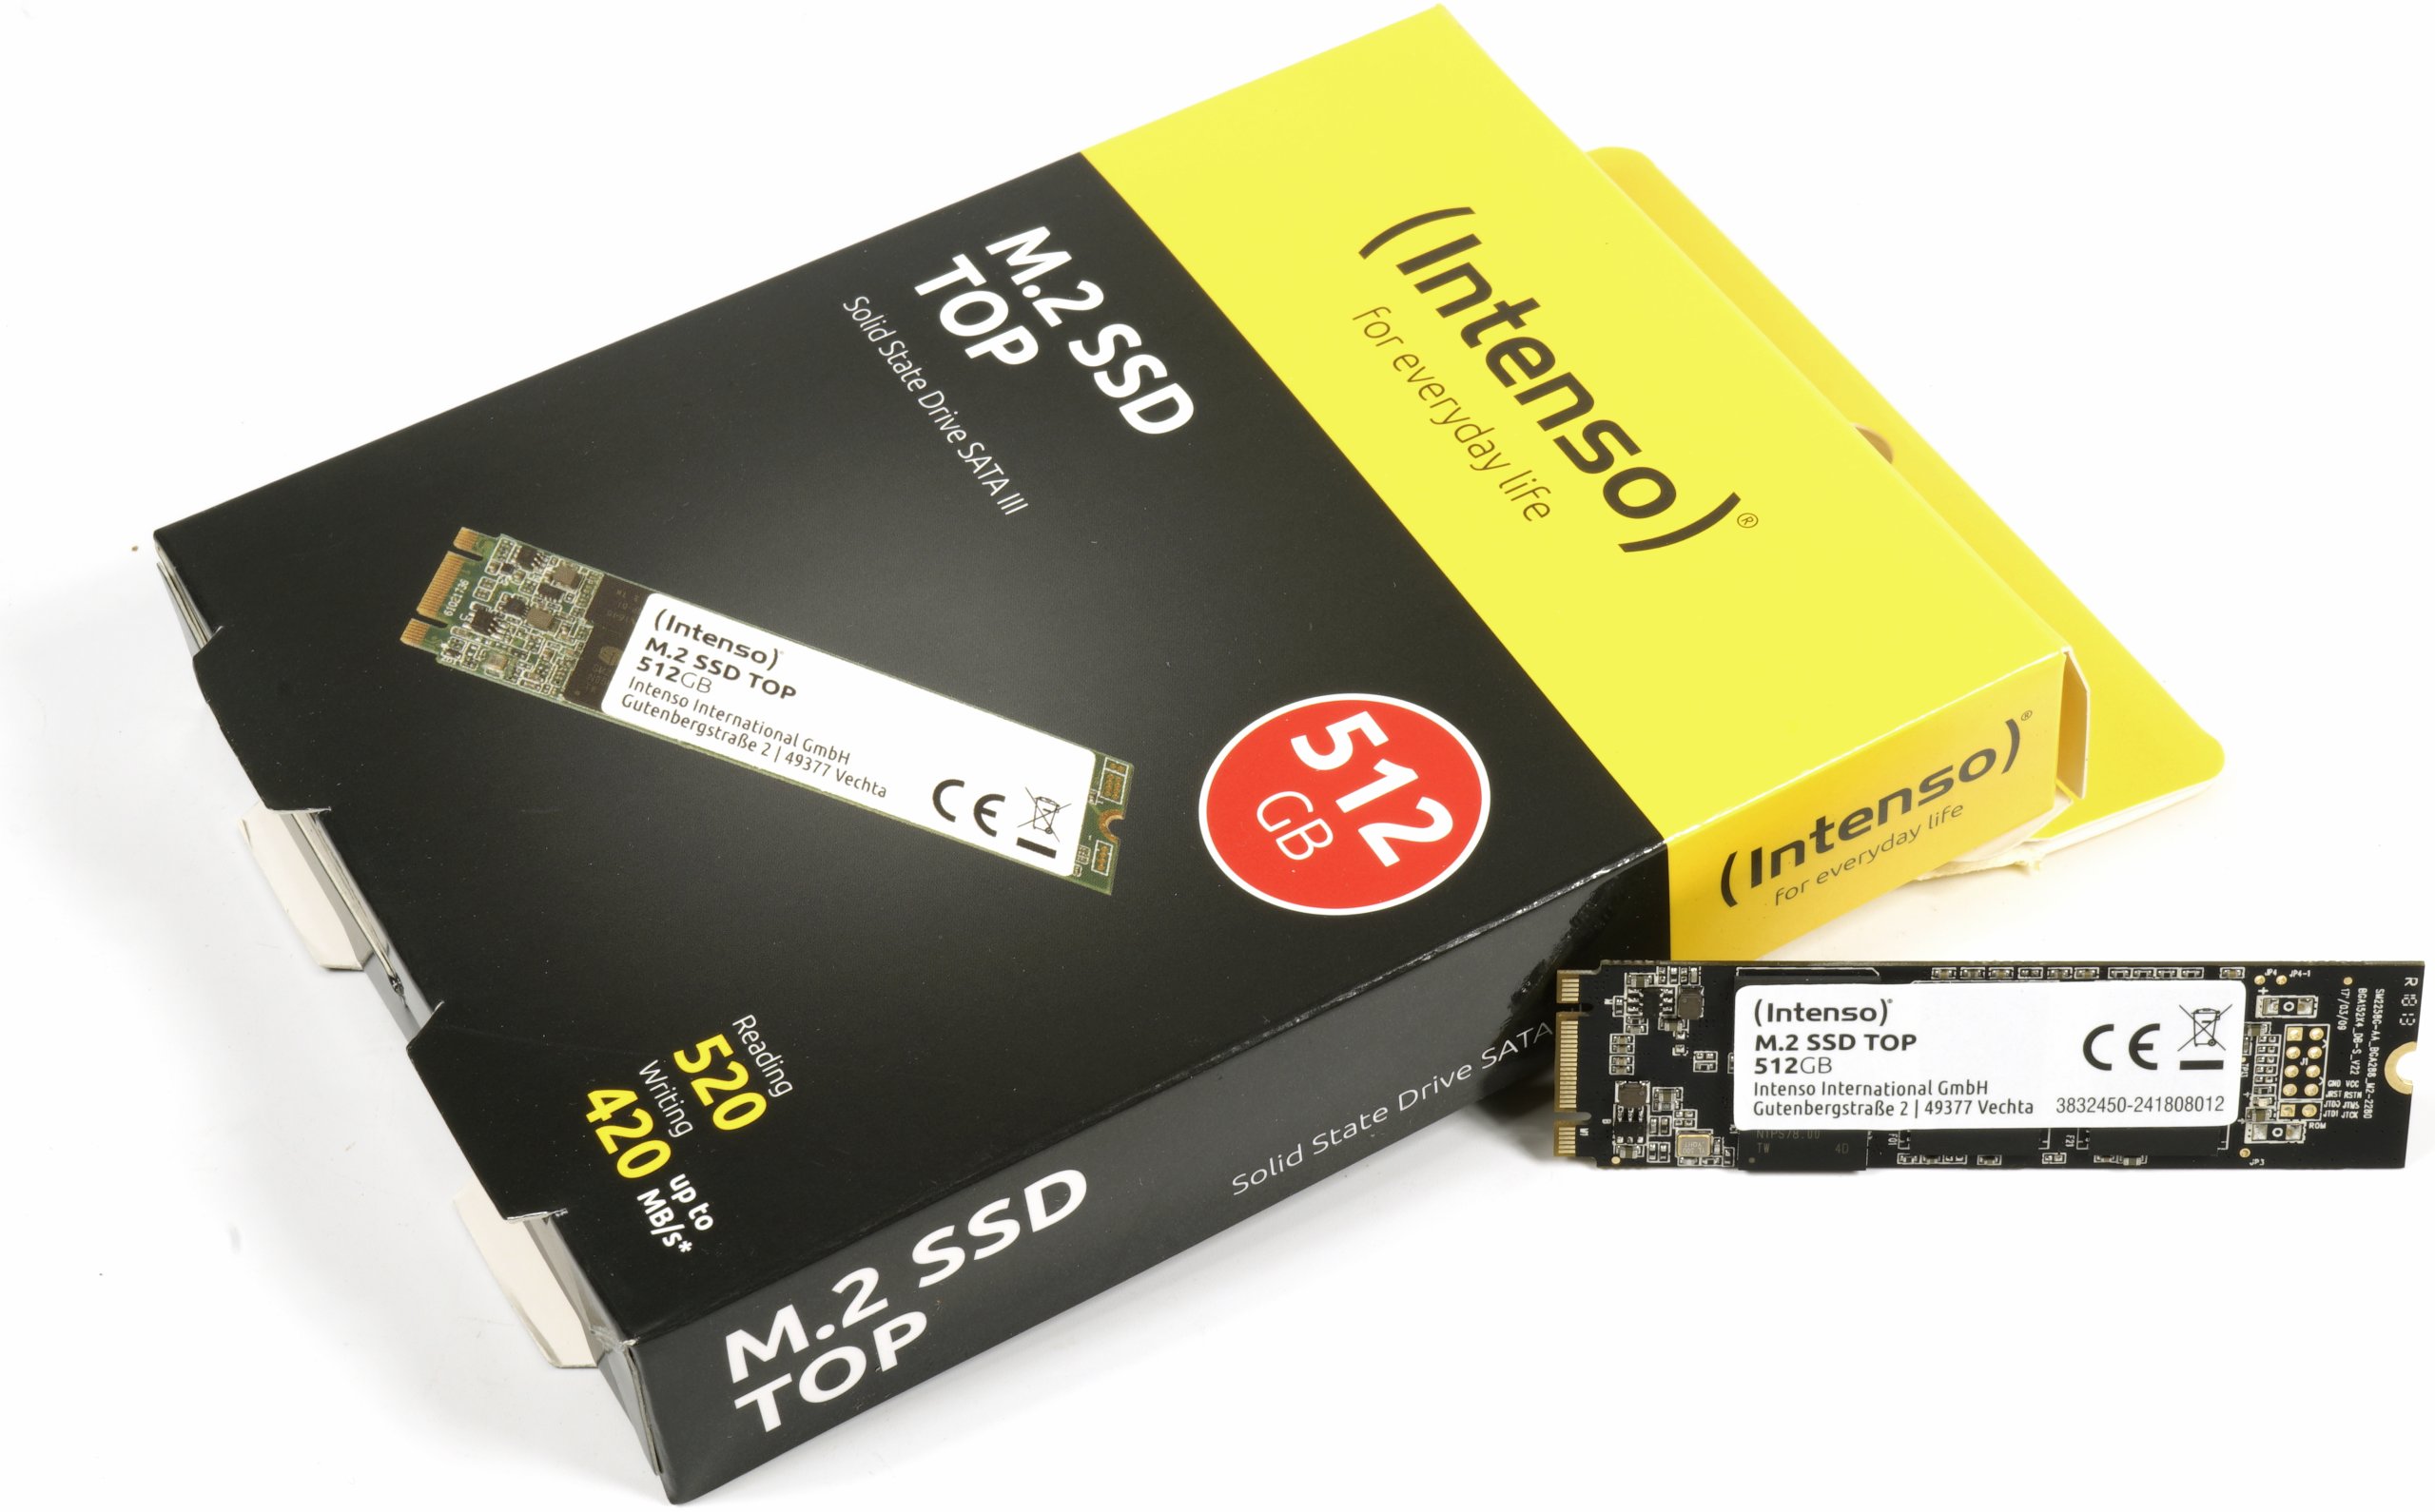 Miracle or Intenso M.2 SSD Top 512GB in How is the 74-euro bargain really? | Page 2 | igor´sLAB